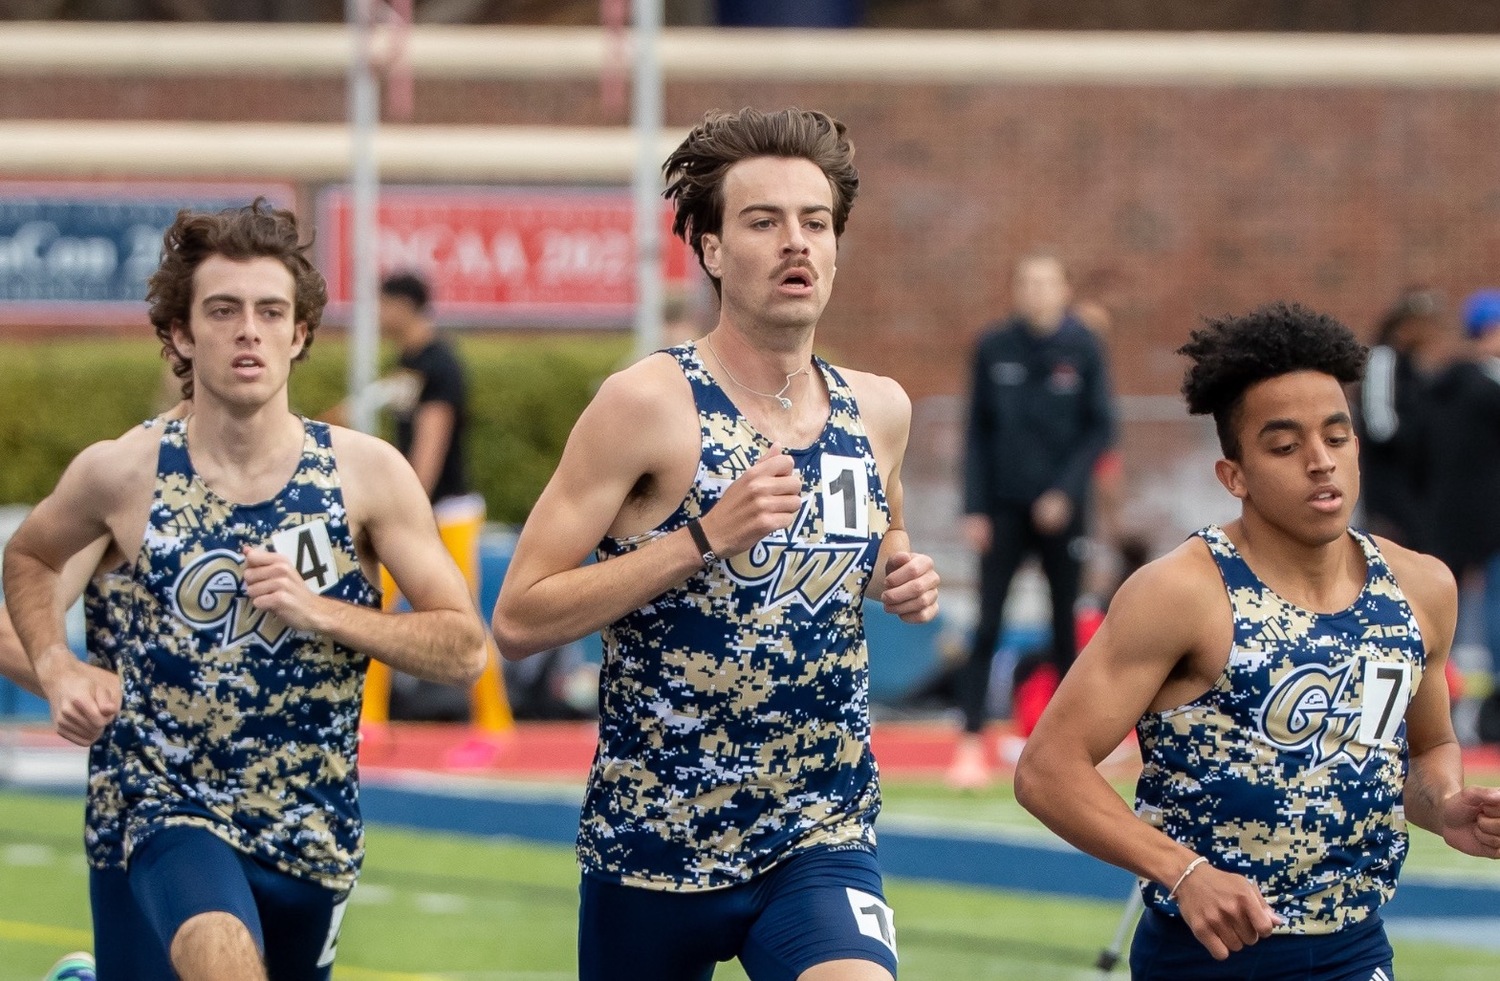 Ryan Fowkes is leaving George Washington having been a part of eight different school records, five of them individual records and three of them on relays.  GW ATHLETICS